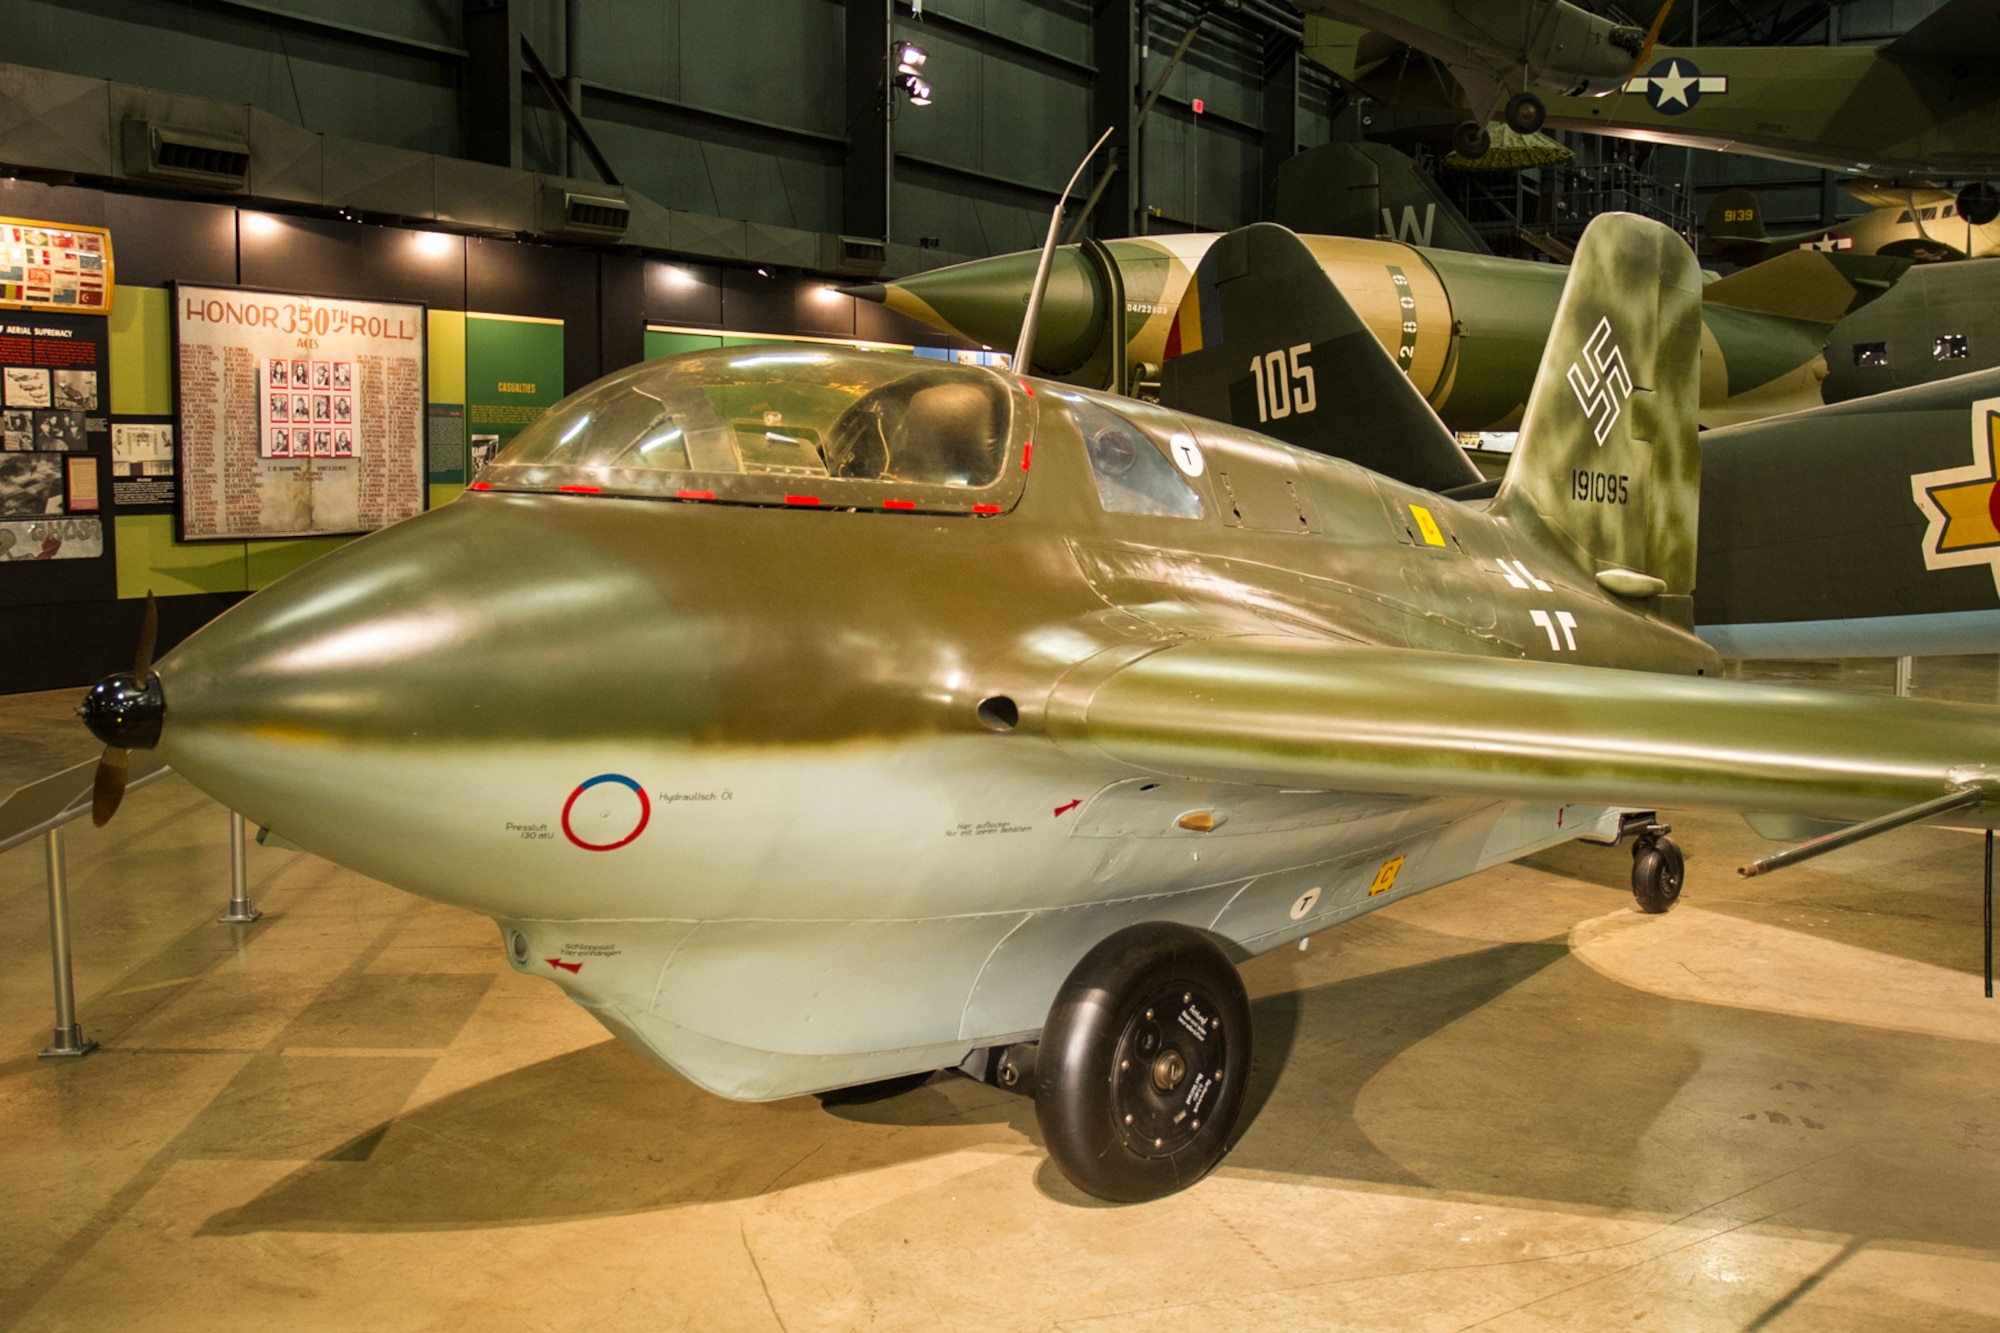 DAYTON, Ohio -- Messerschmitt Me 163B in the World War II Gallery at the National Museum of the United States Air Force. (U.S. Air Force photo) 